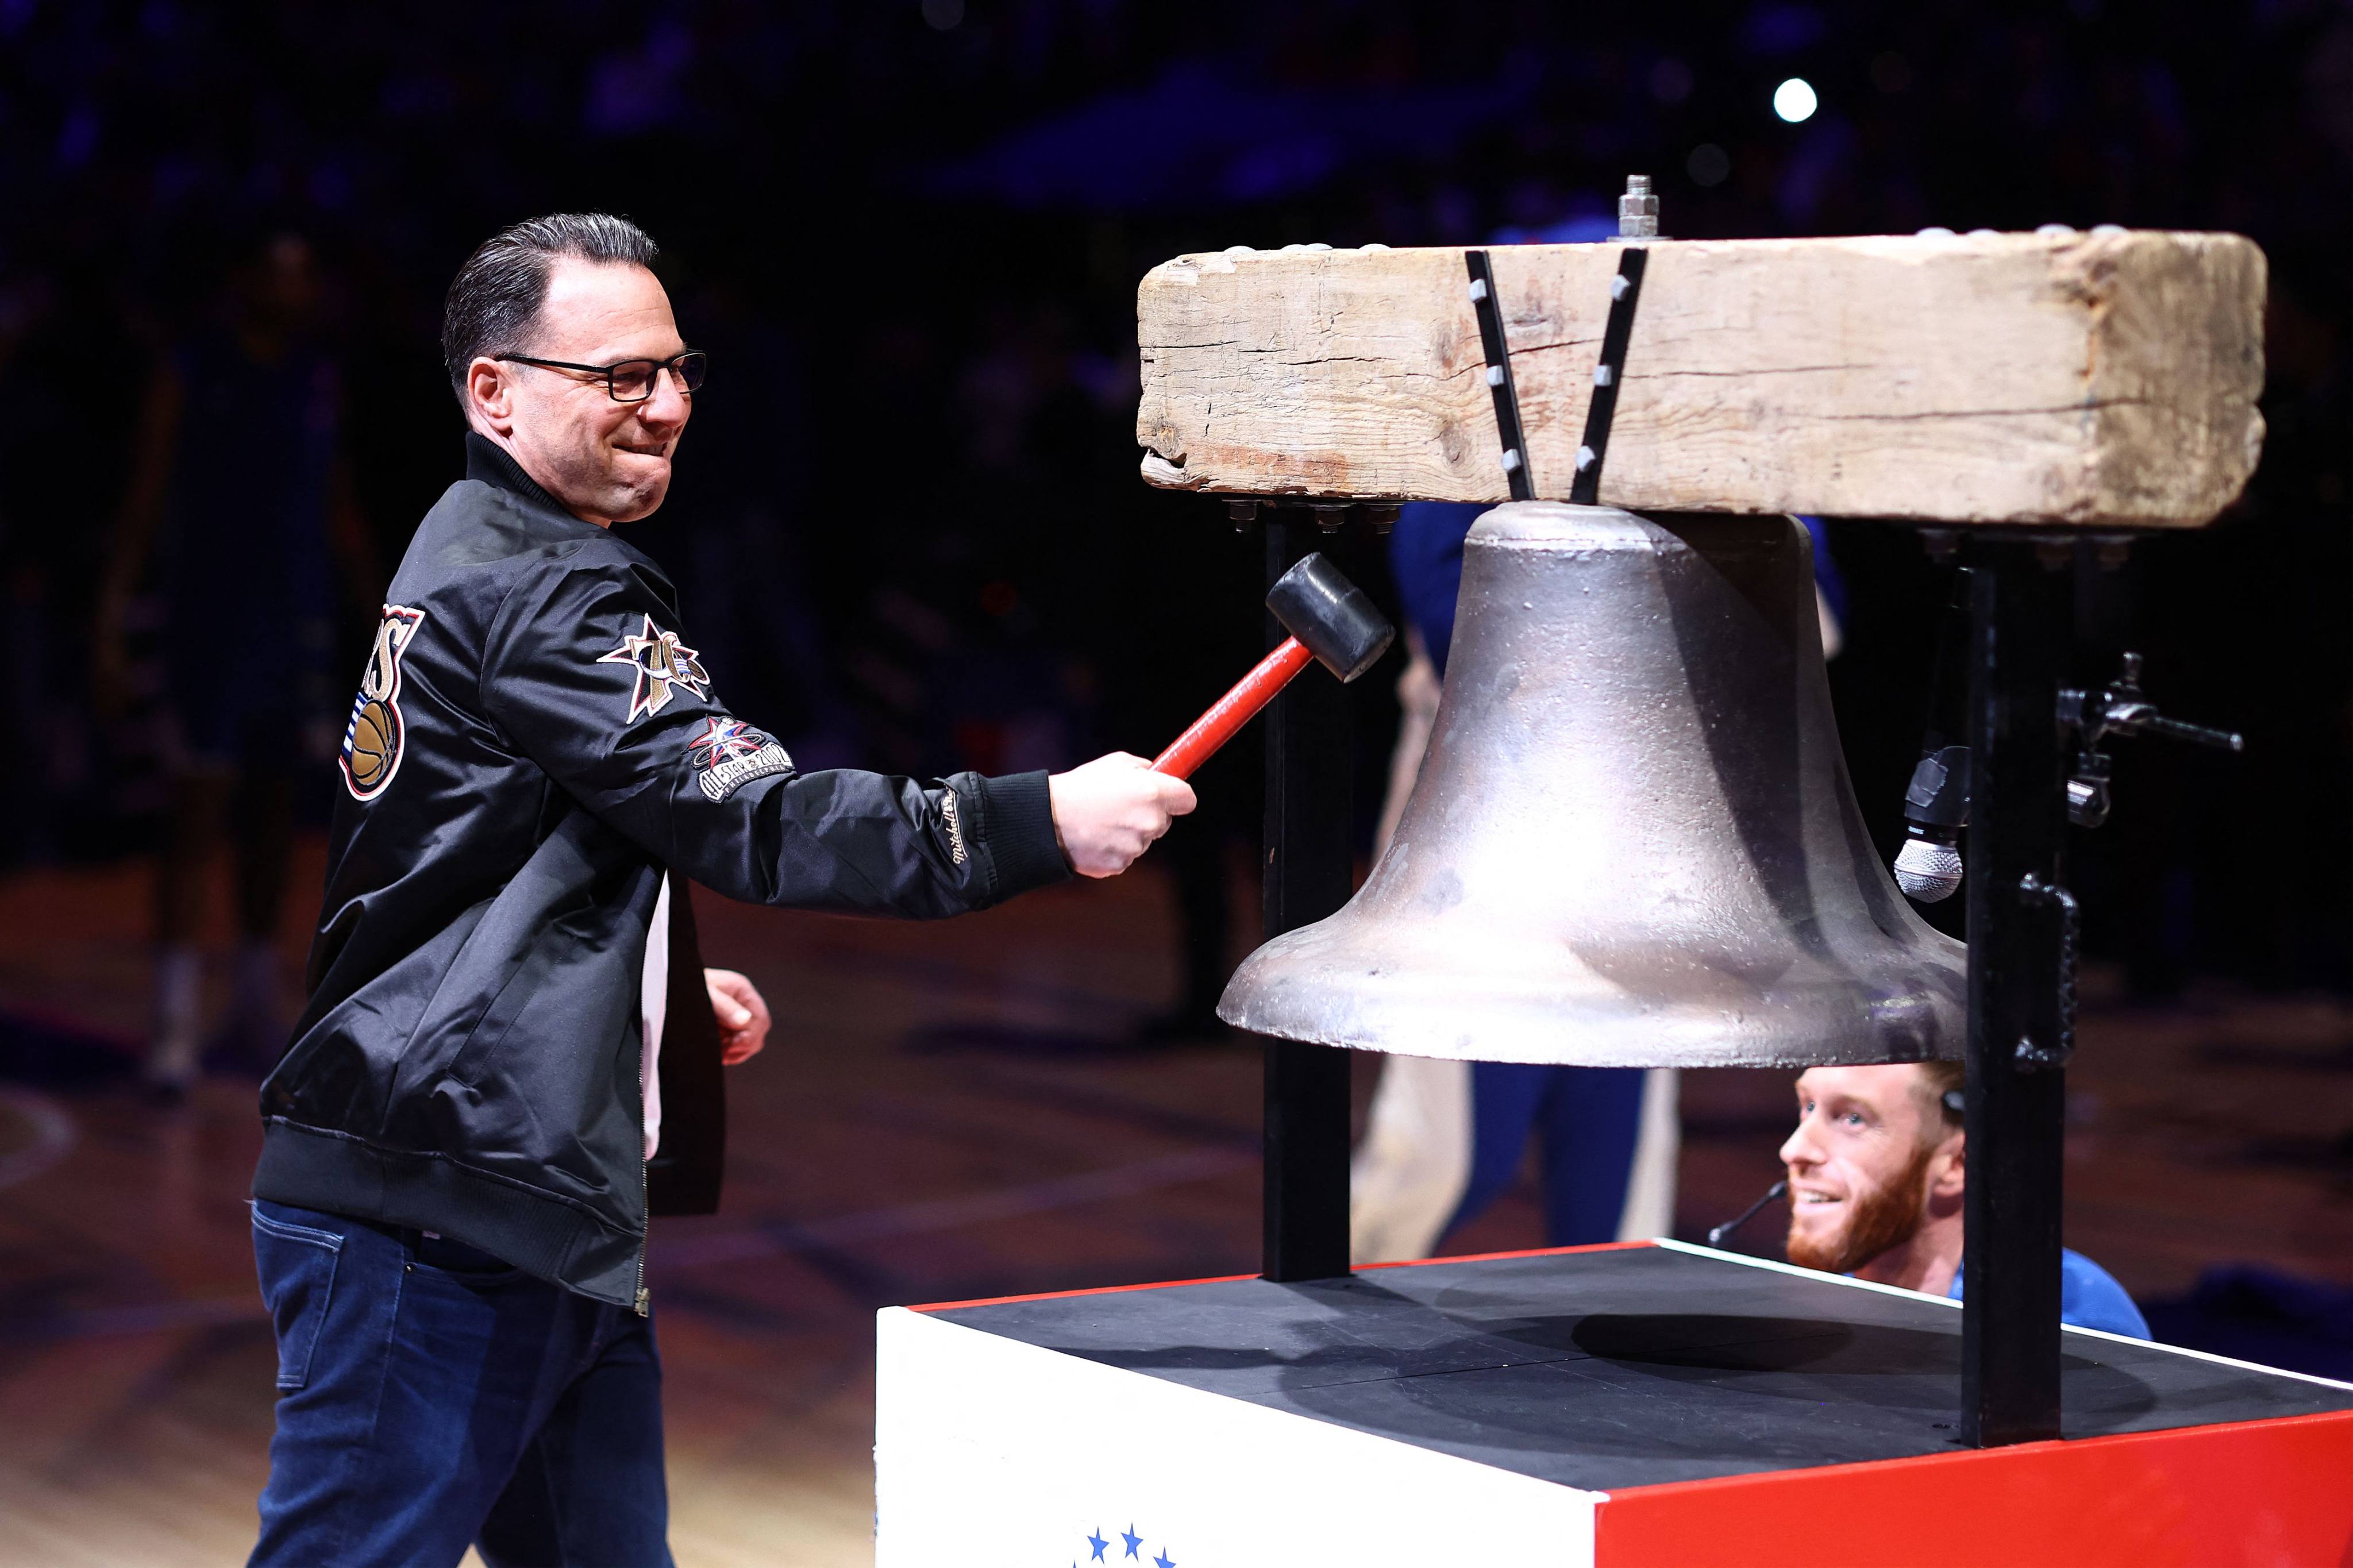 Pennsylvania Governor Josh Shapiro, a prolific Tik Tok poster, rings the bell before a basketball game in Philadelphia on March 18. Photo: Getty Images via AFP